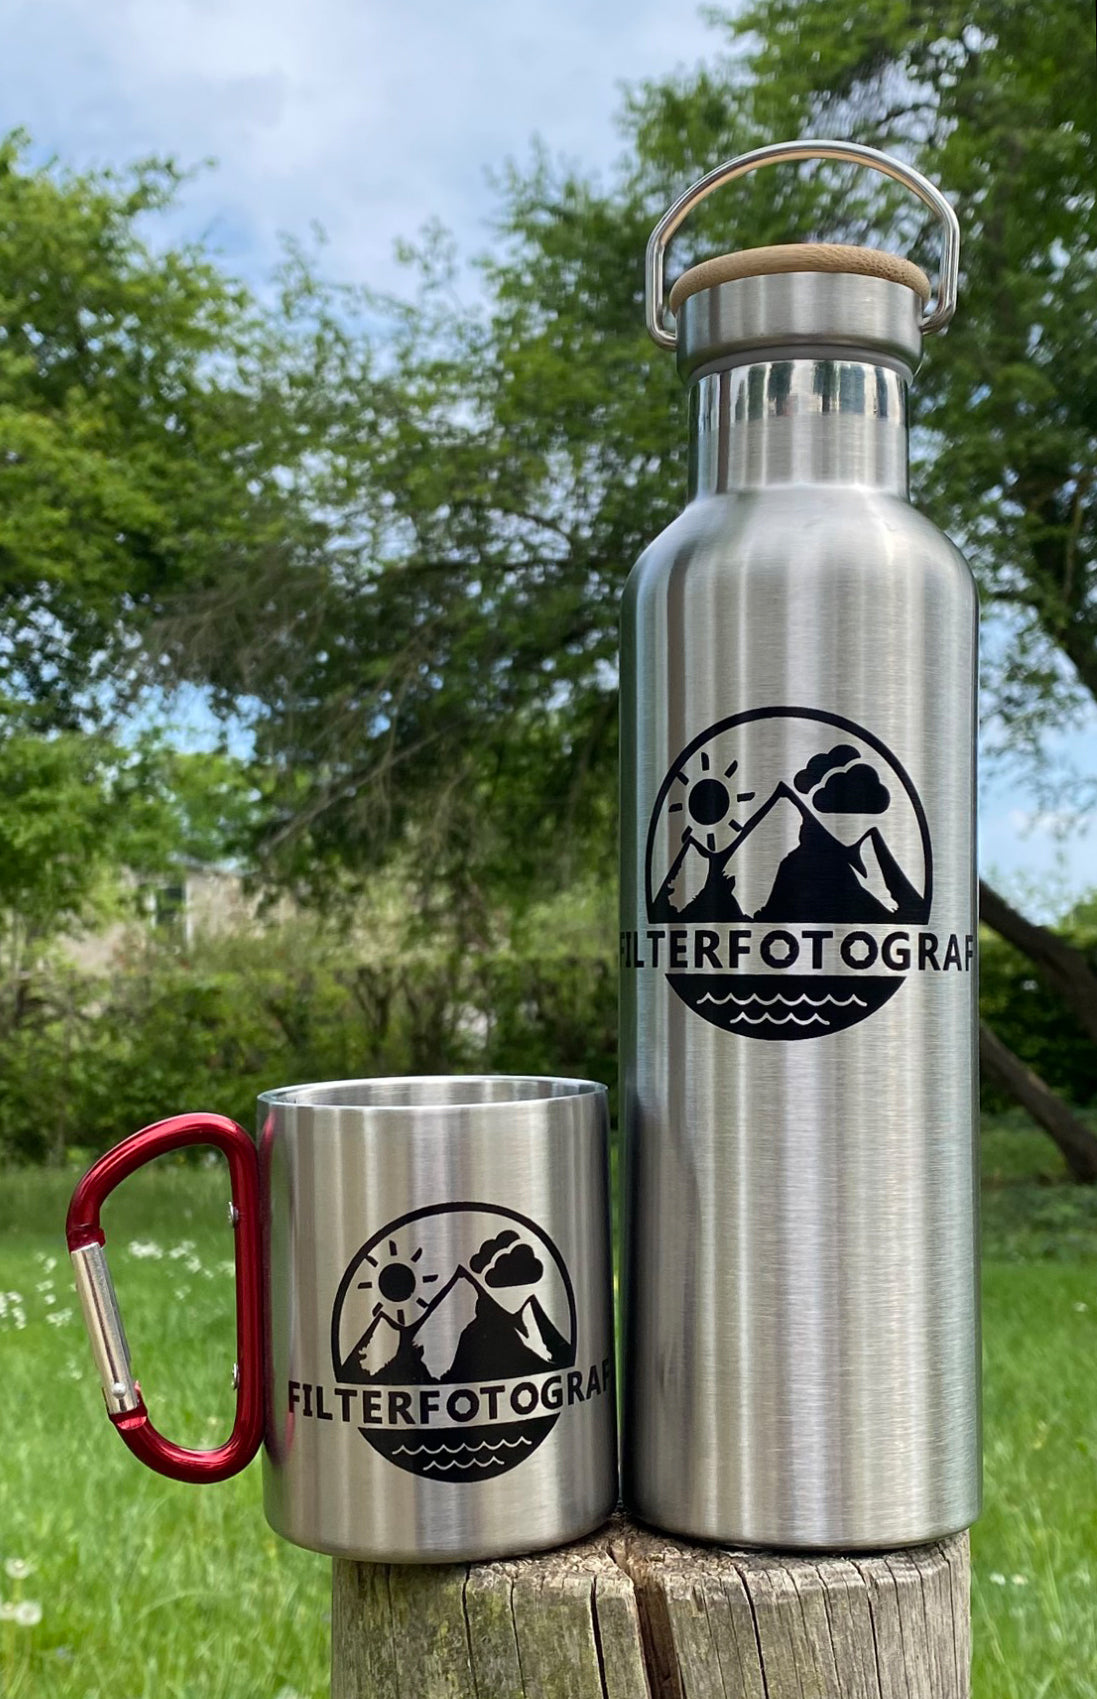 Filter Photographer - Premium stainless steel drinking bottle &amp; carabiner stainless steel cup in a set